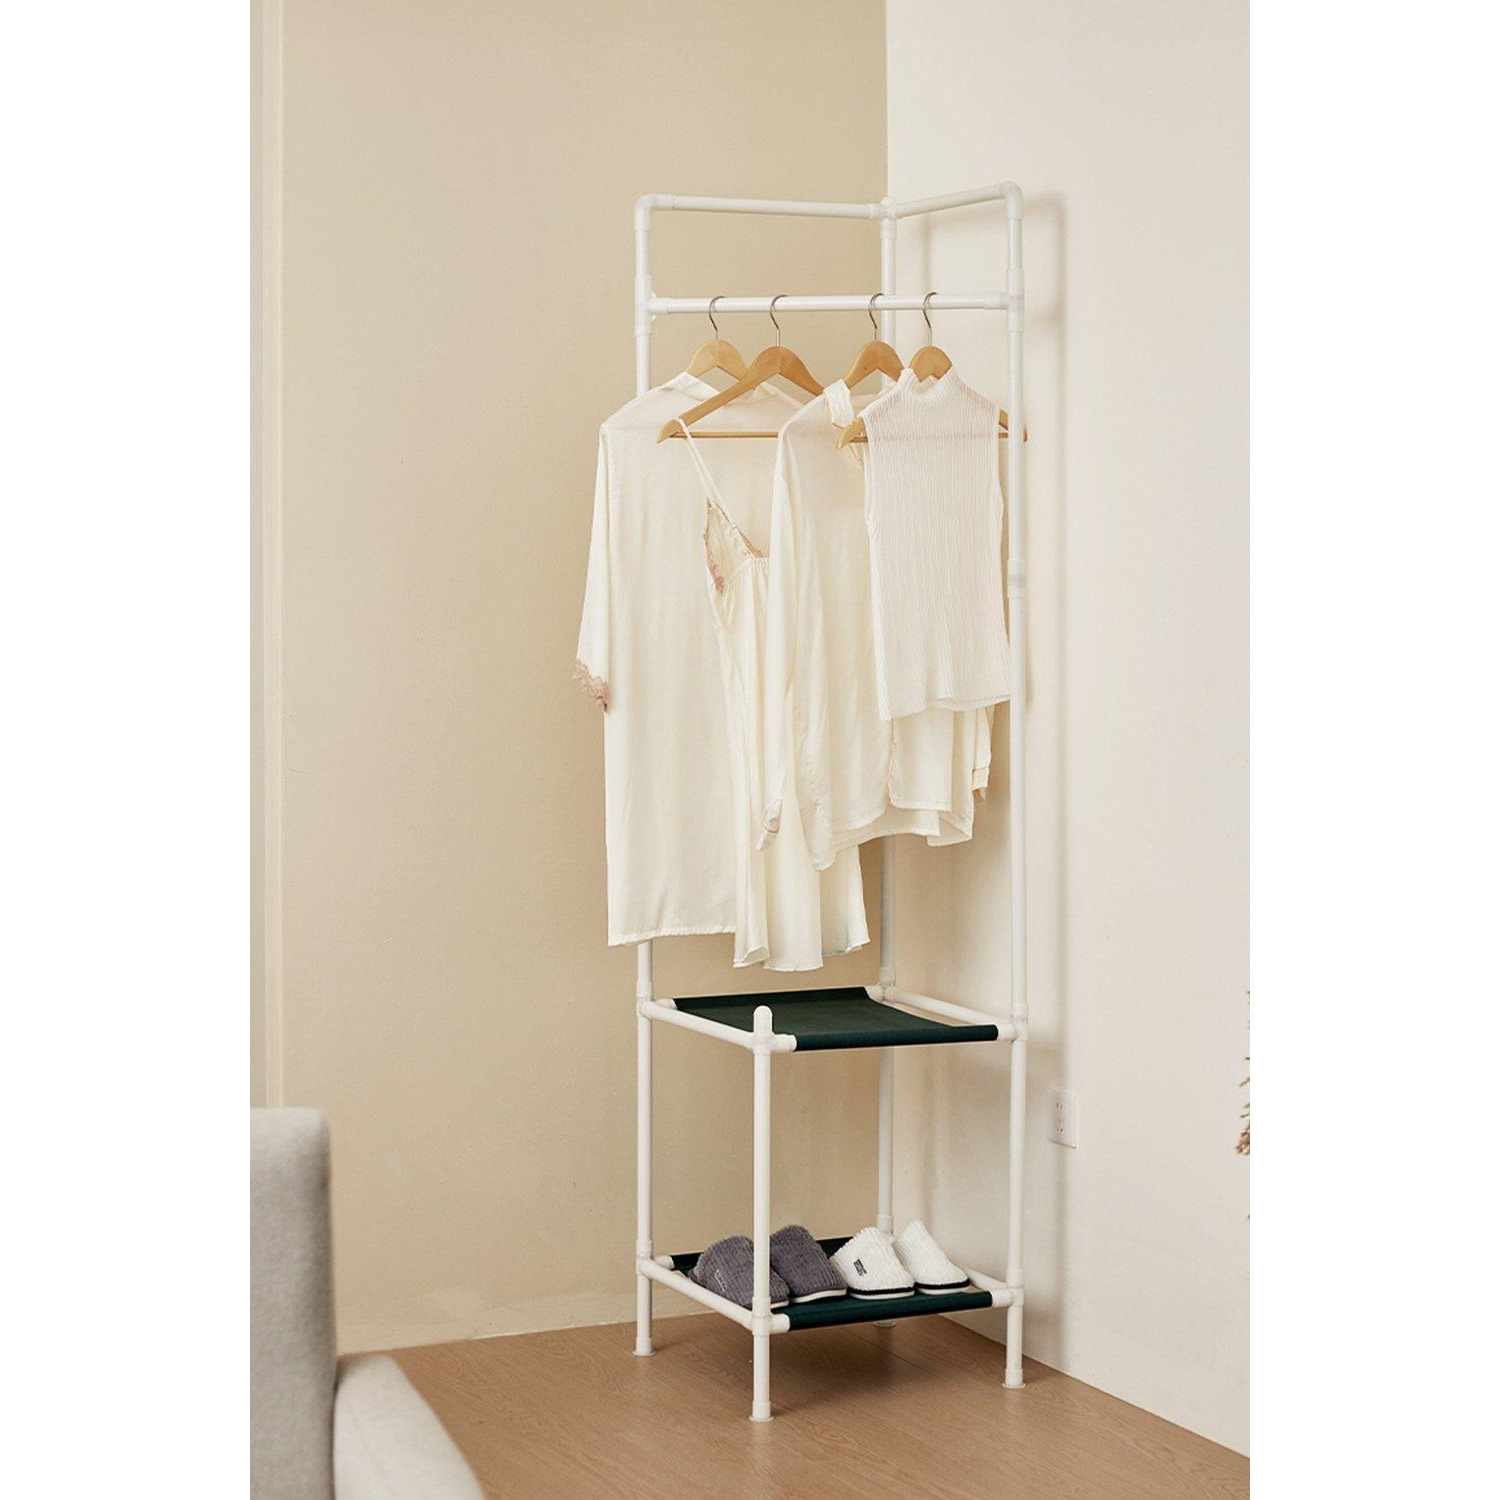 Corner Clothing Rack with 2 Tier Shelves White - image 1